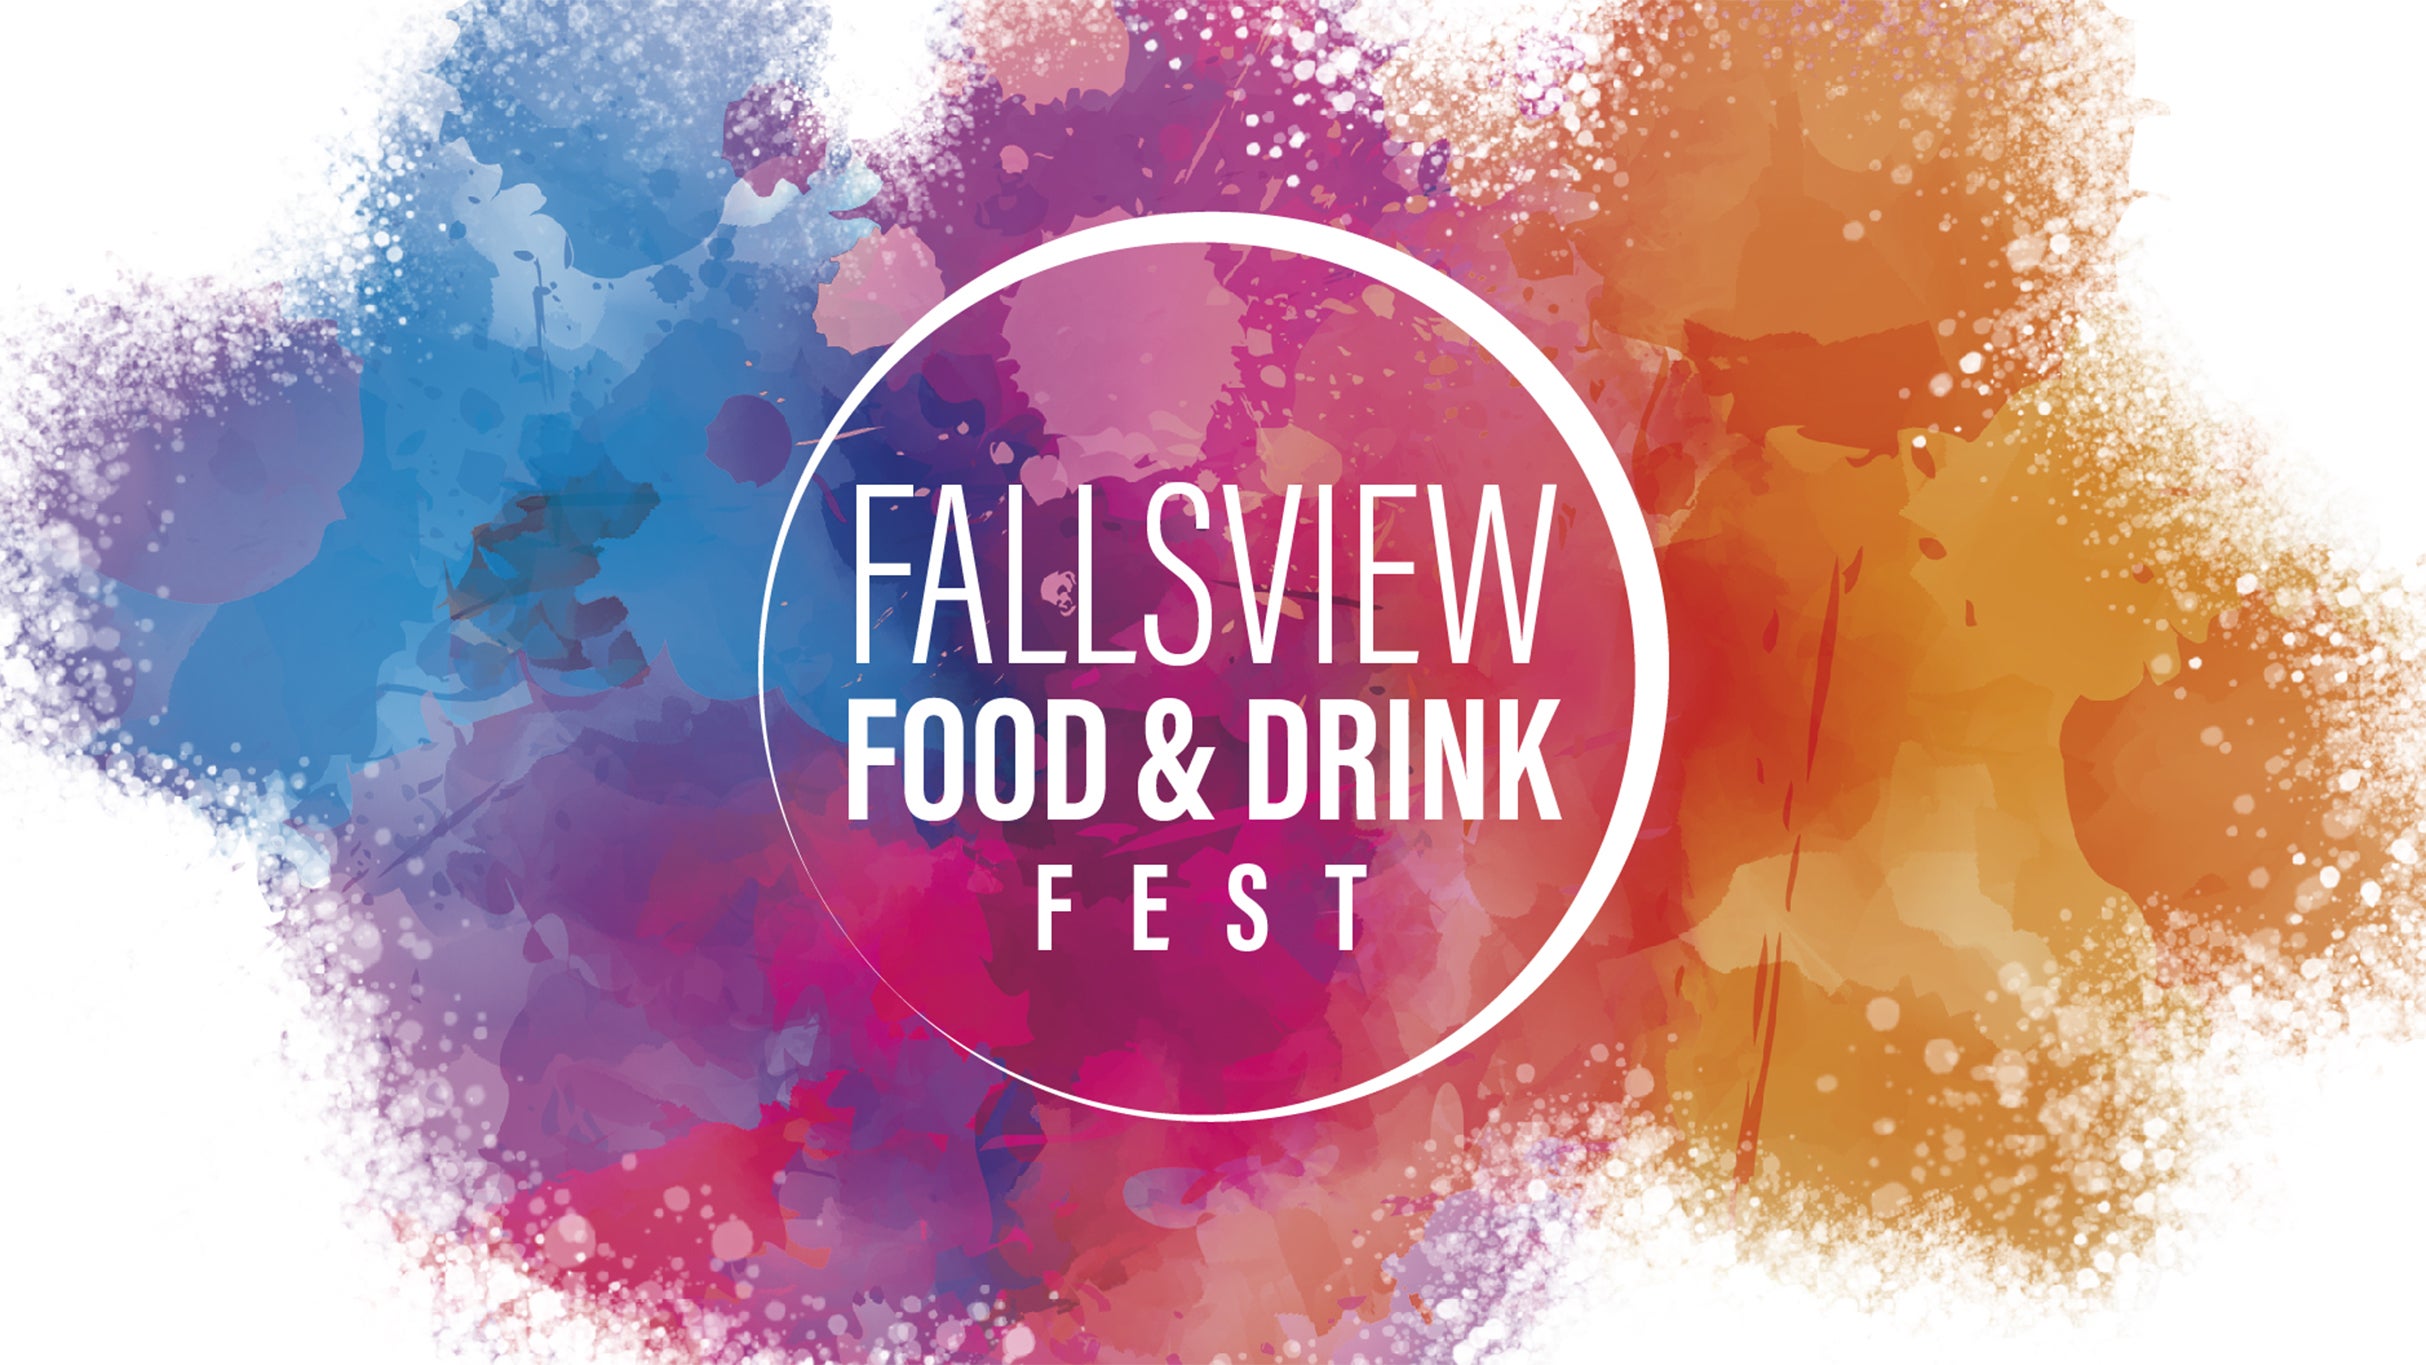 Fallsview Food & Drink Fest - Brunch With Mary Berg in Niagara Falls promo photo for Community presale offer code